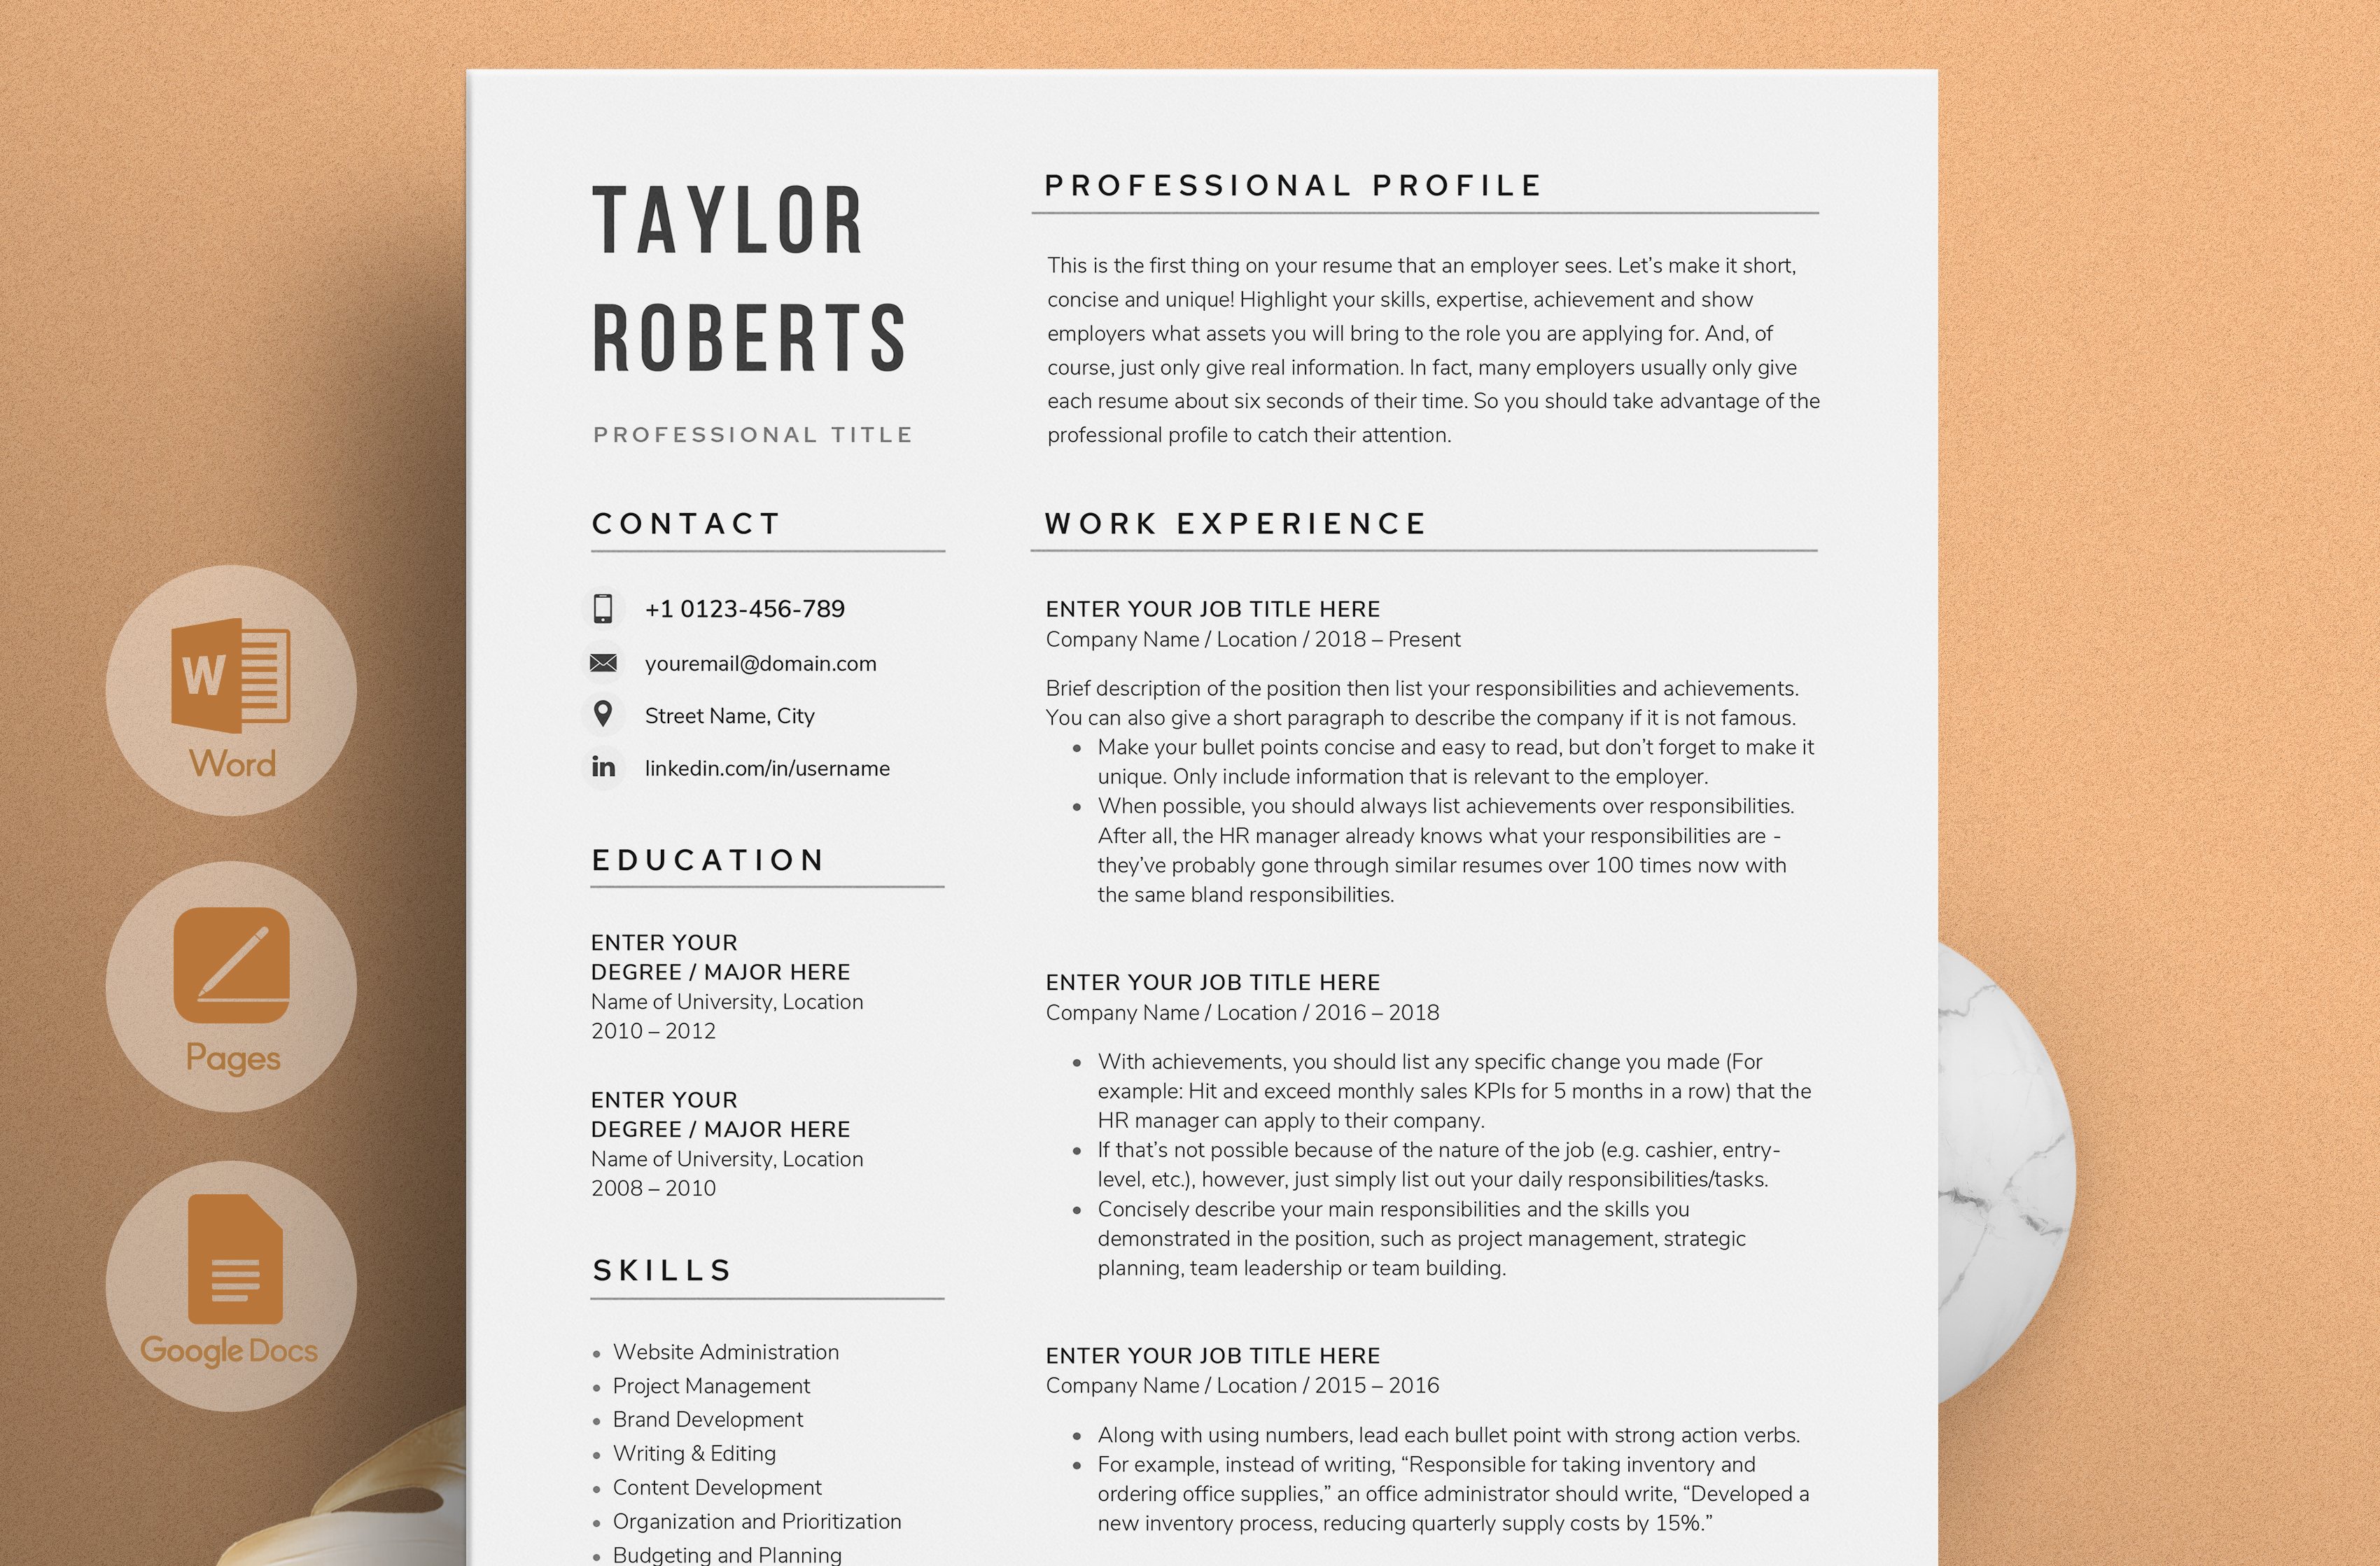 Resume/CV - The Taylor cover image.